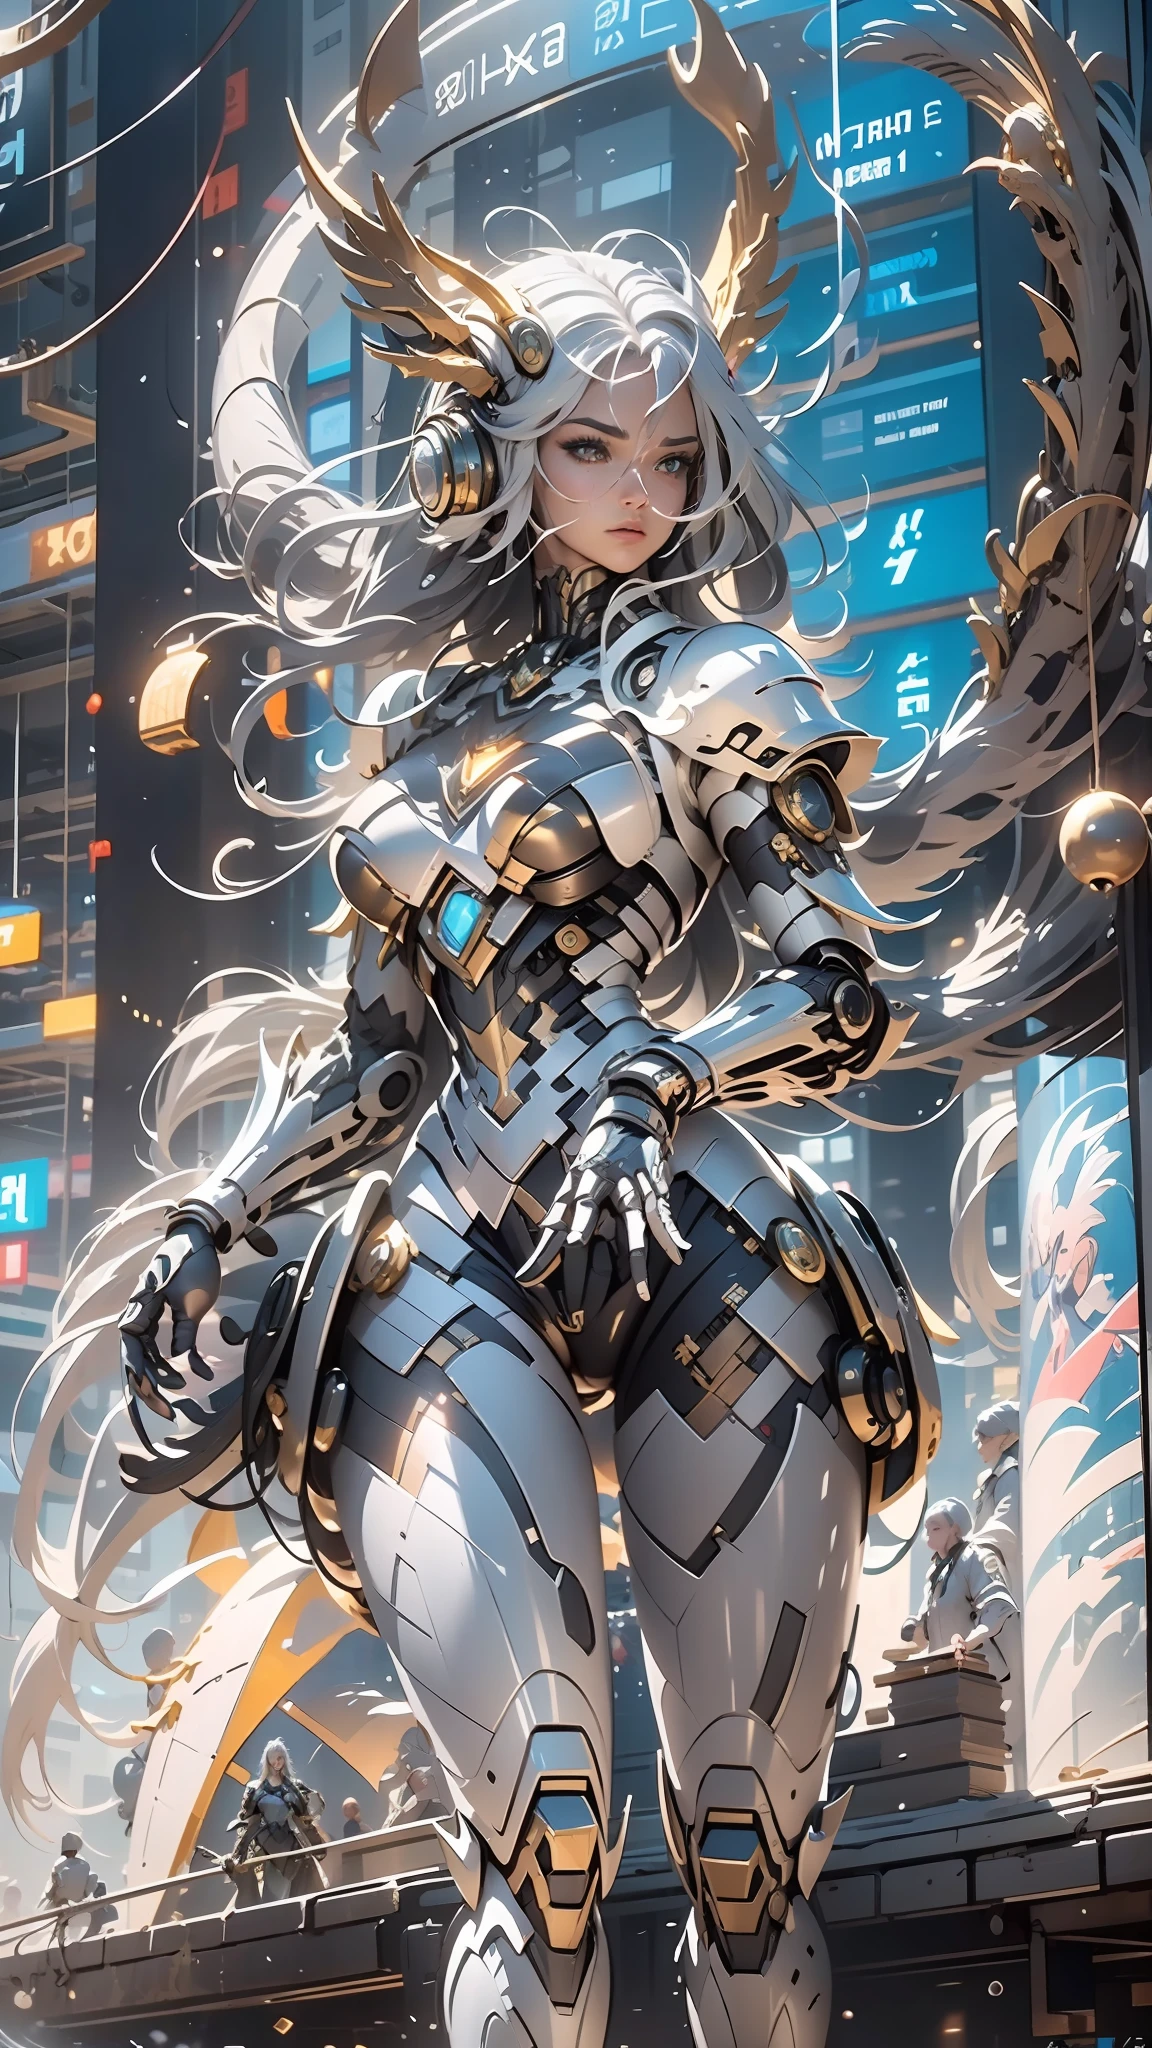 （（best qualtiy））， （（tmasterpiece））， （The is very detailed：1.3）， 3D，In Cyberpunk World，A girl in mechanical armor，holding futuristic weapons，The battle is ahead，Behind her was a medium-sized armored mech，At the end of the end, There are super giant mecha Oriental Dragon，hdr（HighDynamicRange），Ray traching，NVIDIA RTX，Hyper-Resolution，Unreal 5，sub surface scattering，PBR textures，Post-processing，Anisotropic filtering，depth of fields，Maximum clarity and sharpnesany-Layer Textures，Albedo e mapas Speculares，Surface coloring，Accurately simulate light-material interactions，perfectly proportions，rendering by octane，twotonelighting，Low ISO，White balance，trichotomy，Wide aperture，8K raw data，High-Efficiency Sub-Pixel，sub-pixel convolution，Luminous Particle，